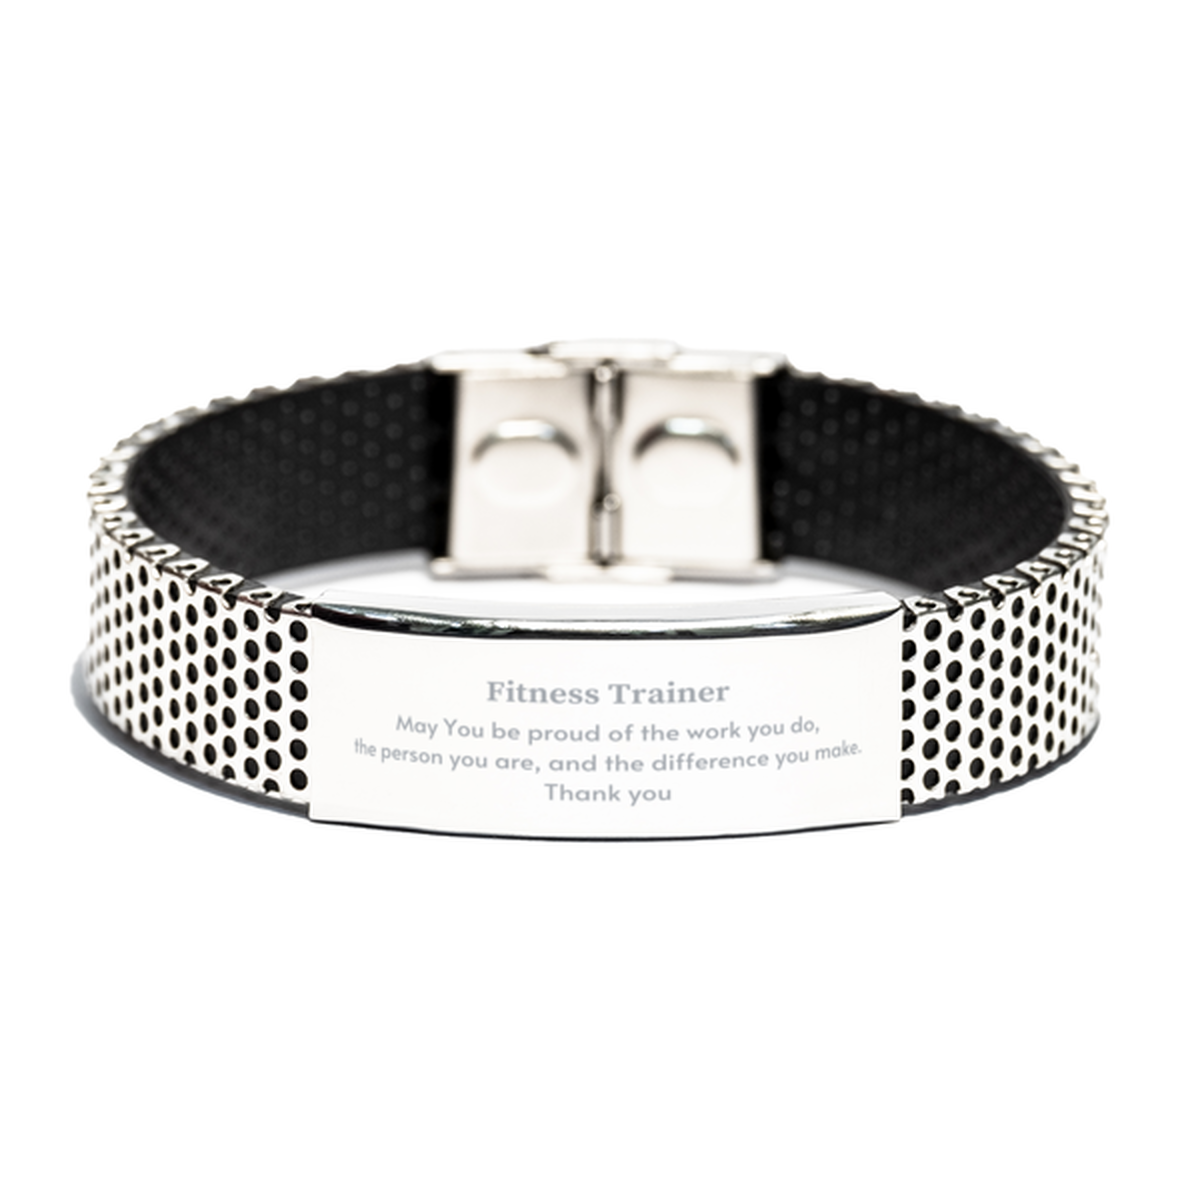 Heartwarming Stainless Steel Bracelet Retirement Coworkers Gifts for Fitness Trainer, Fitness Trainer May You be proud of the work you do, the person you are Gifts for Boss Men Women Friends